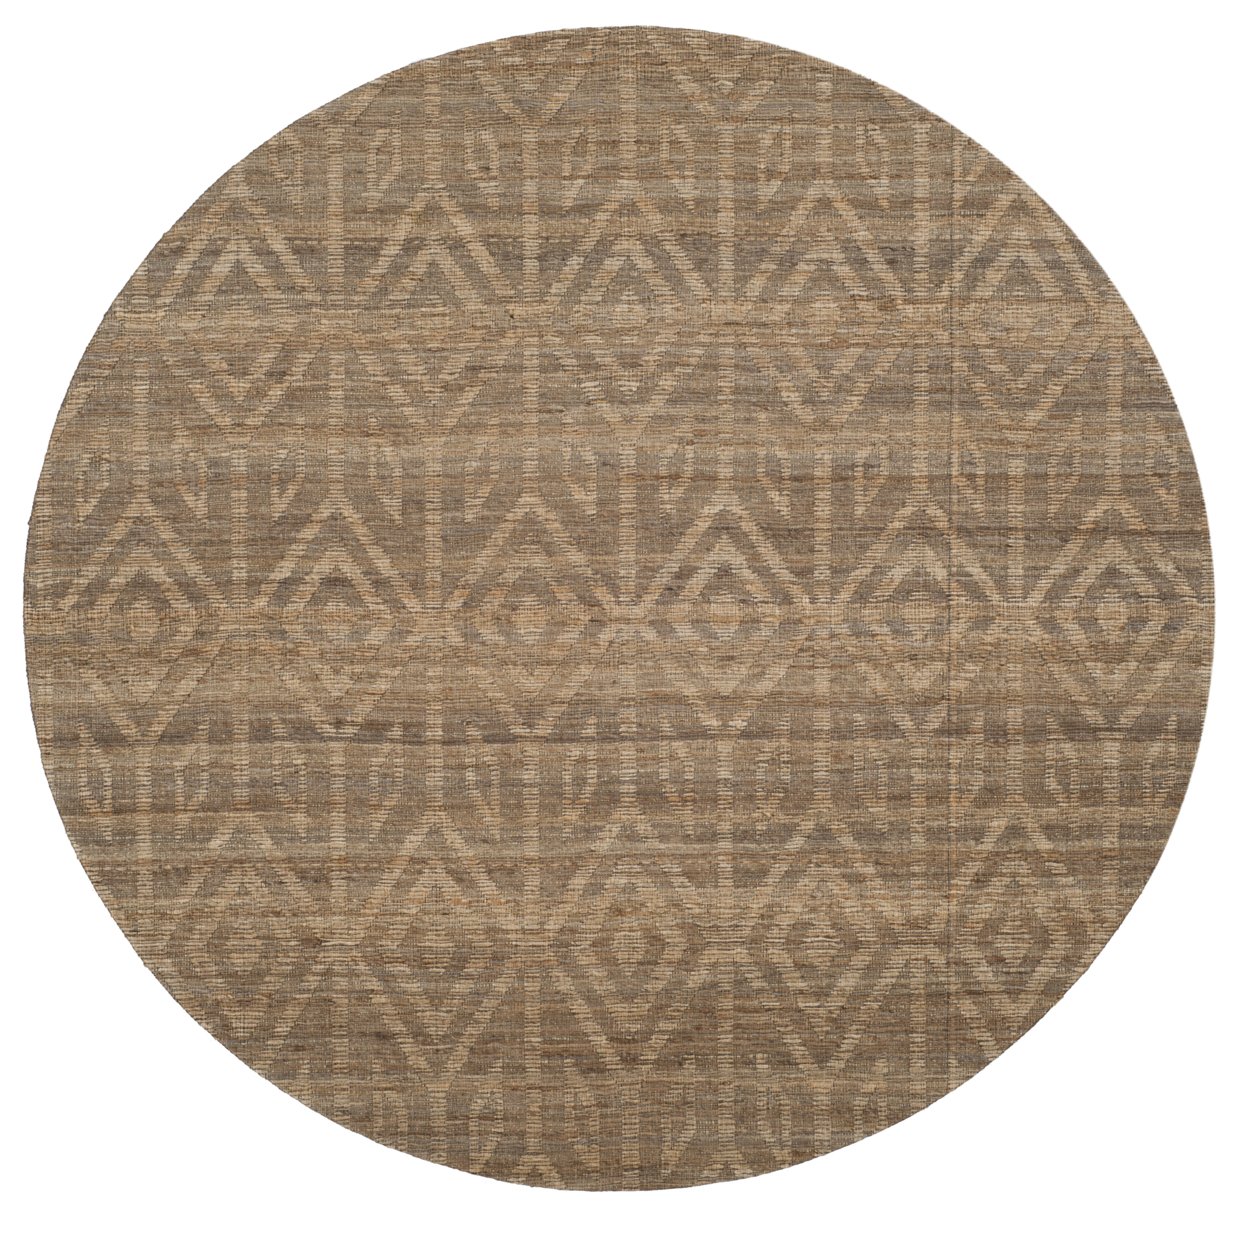 SAFAVIEH Cape Cod Collection CAP411A Handwoven Camel Rug - 6' Round